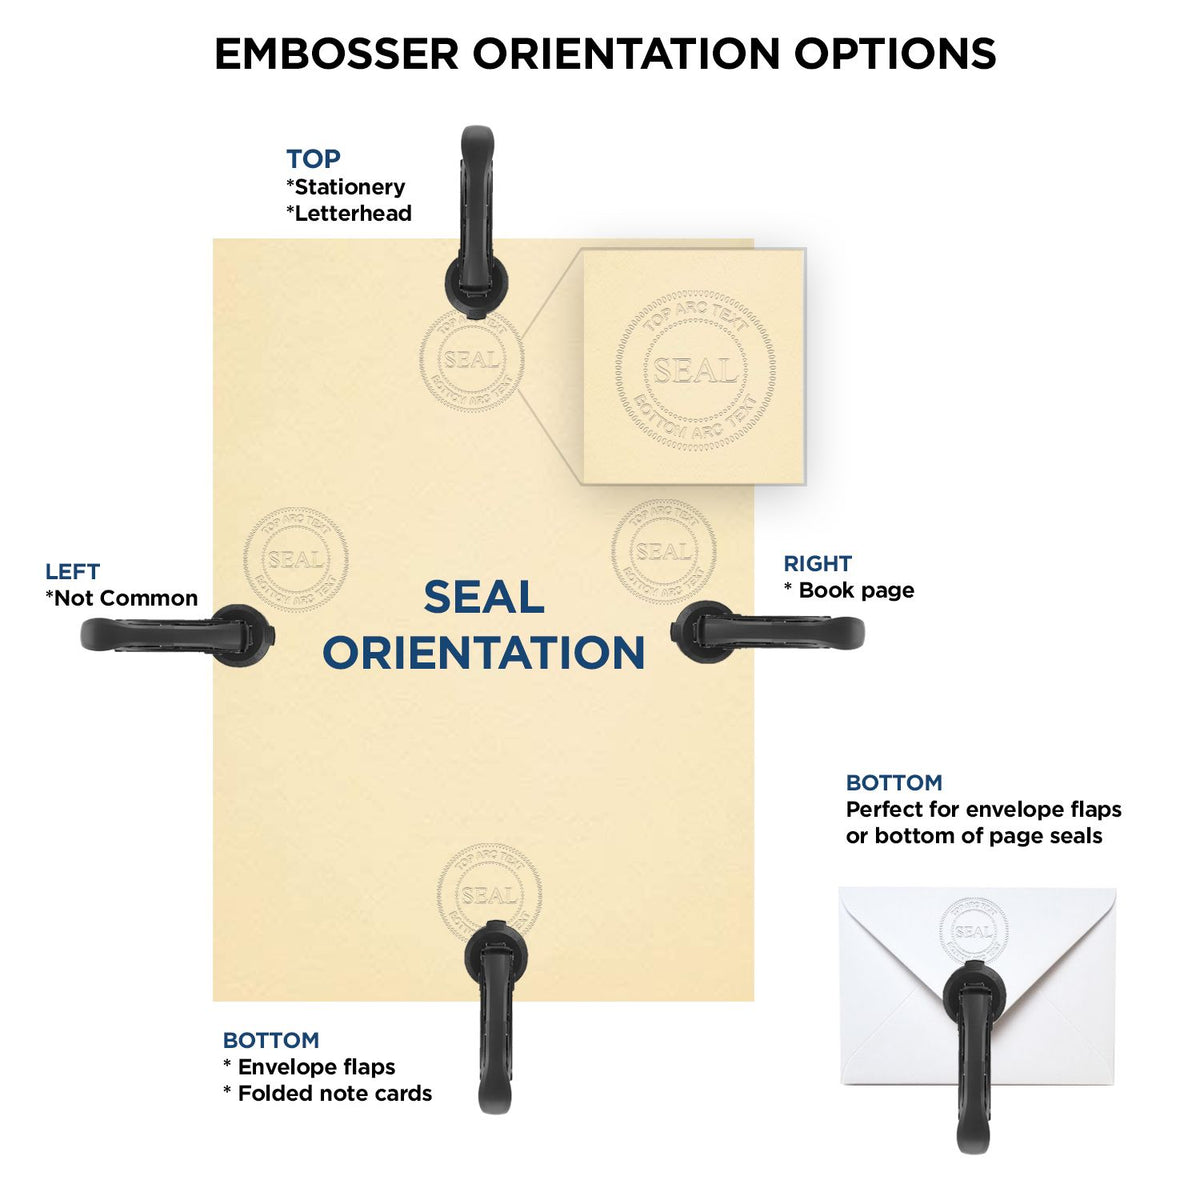 An infographic for the Heavy Duty Cast Iron Arizona Architect Embosser showing embosser orientation, this is showing examples of a top, bottom, right and left insert.